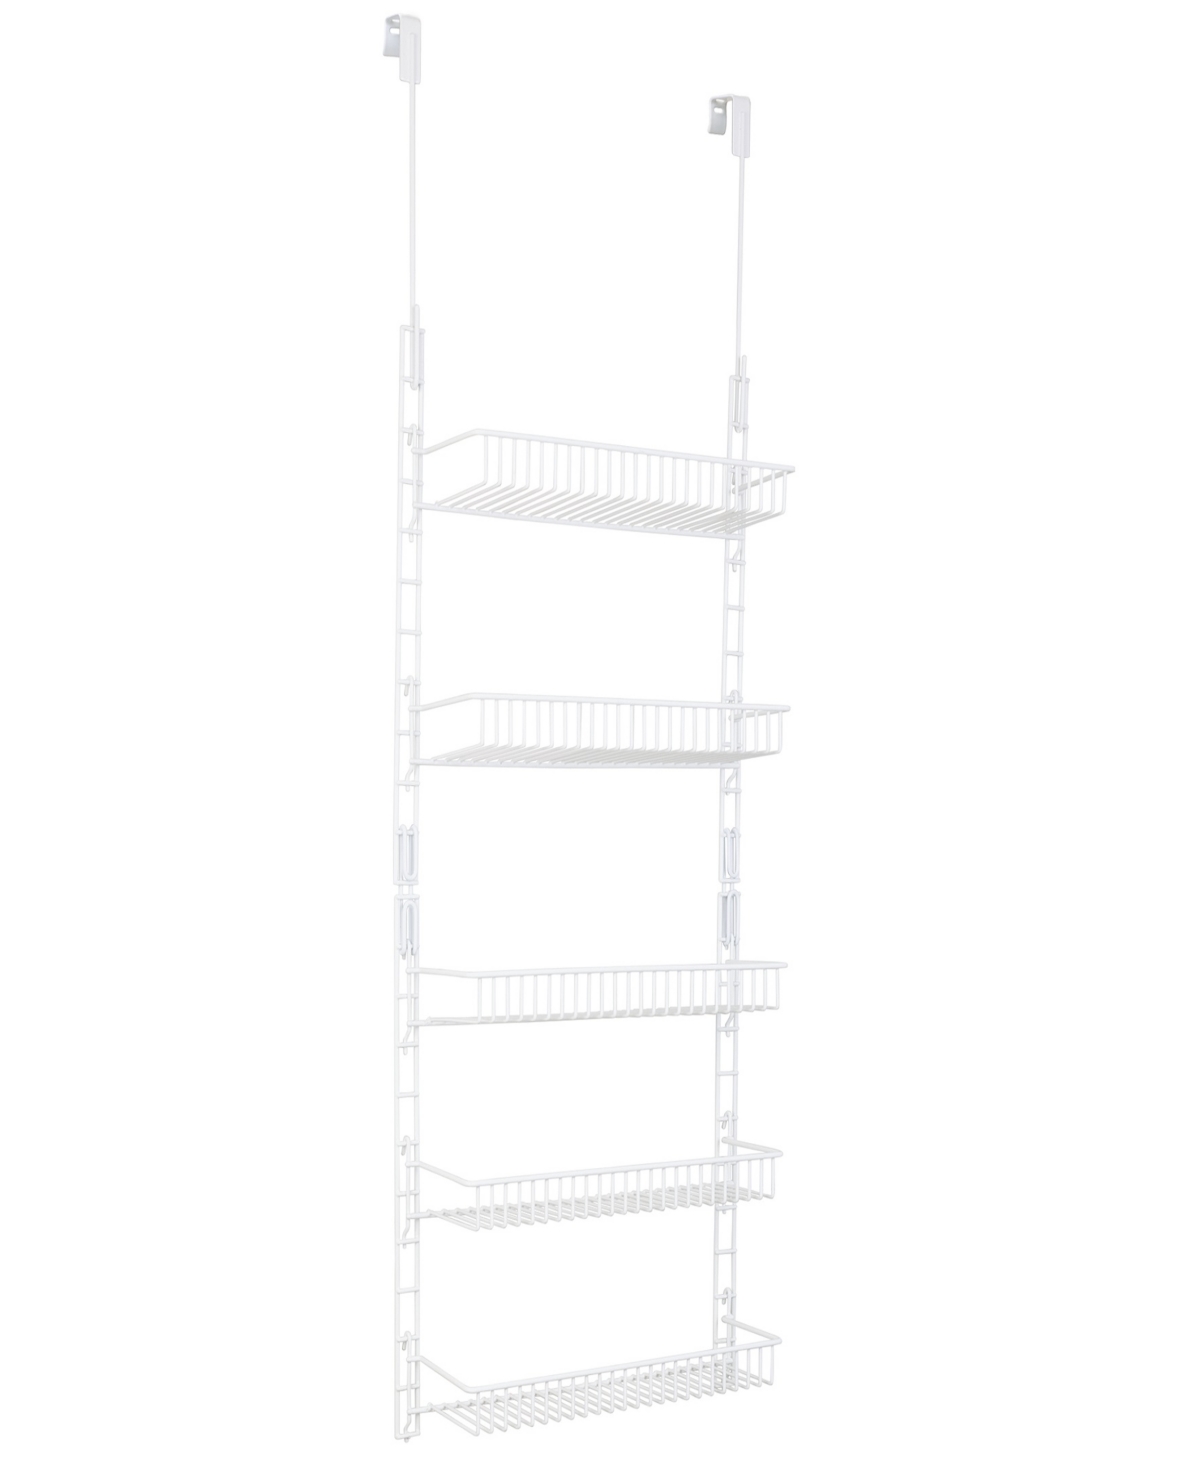 5-Tier Over the Door Pantry Organizer Rack with Adjustable Shelves - White